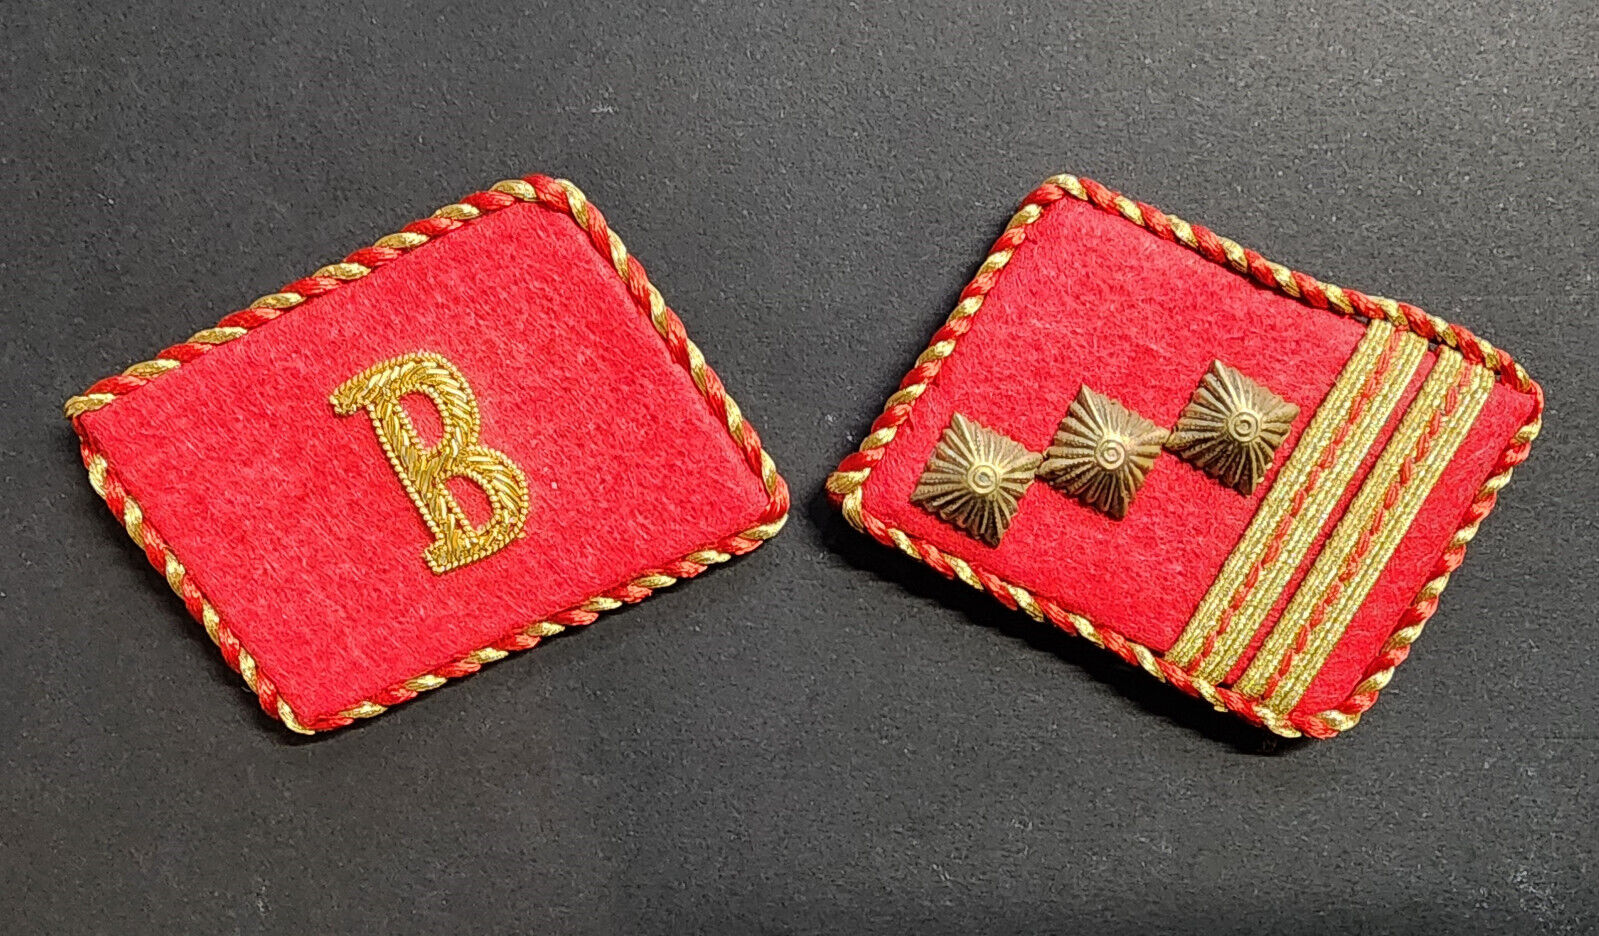 WW2 WWII German ELITE Stormtroopers B collar tabs patches w 3 pips + RZM tag